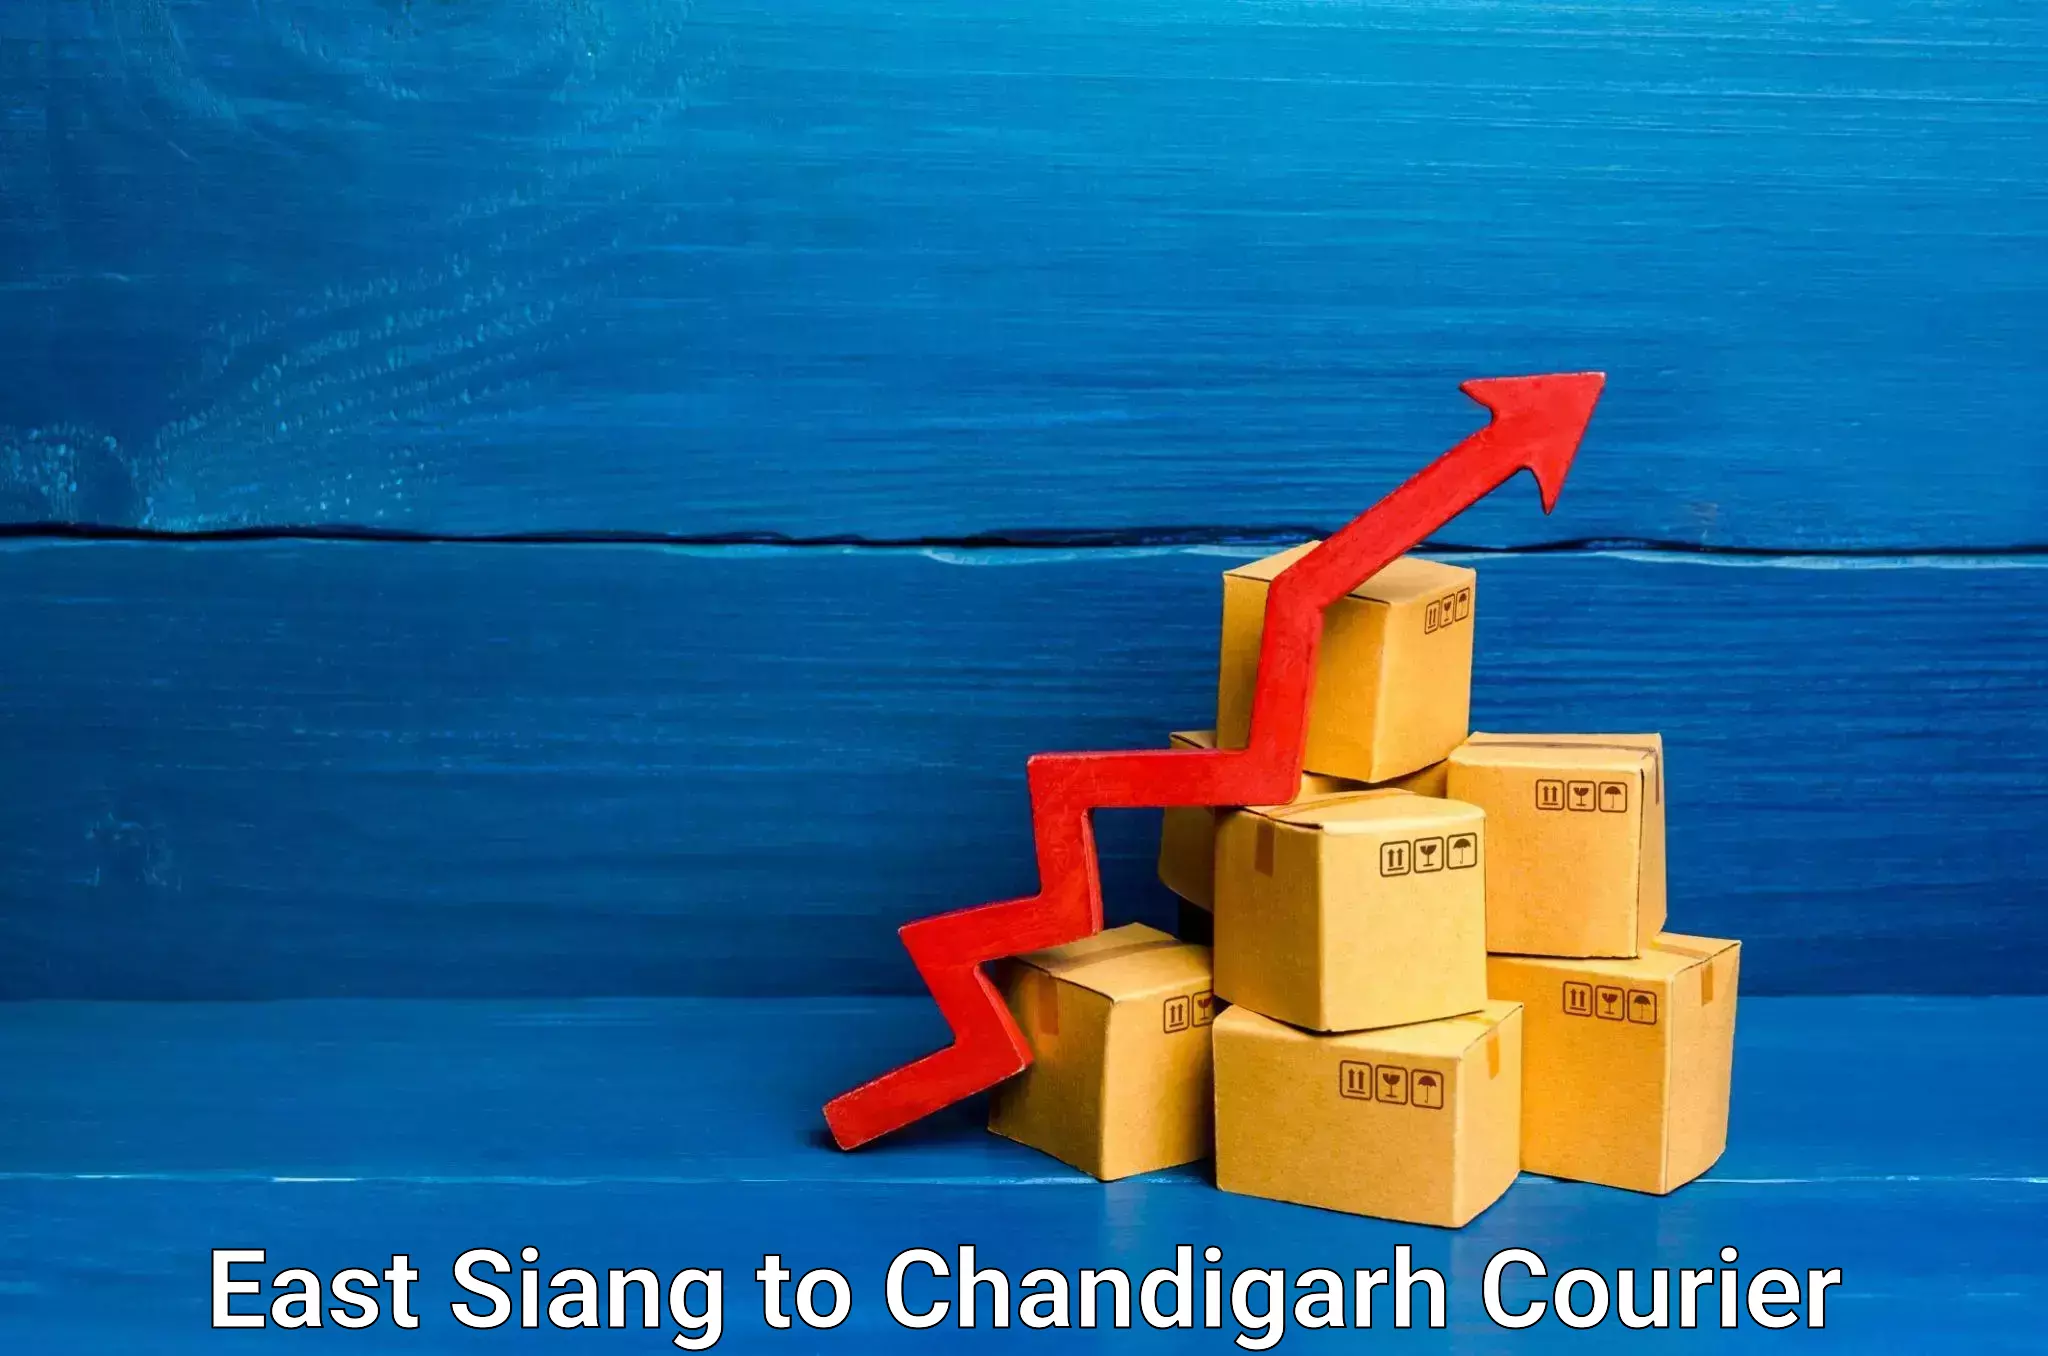 Courier service comparison East Siang to Chandigarh